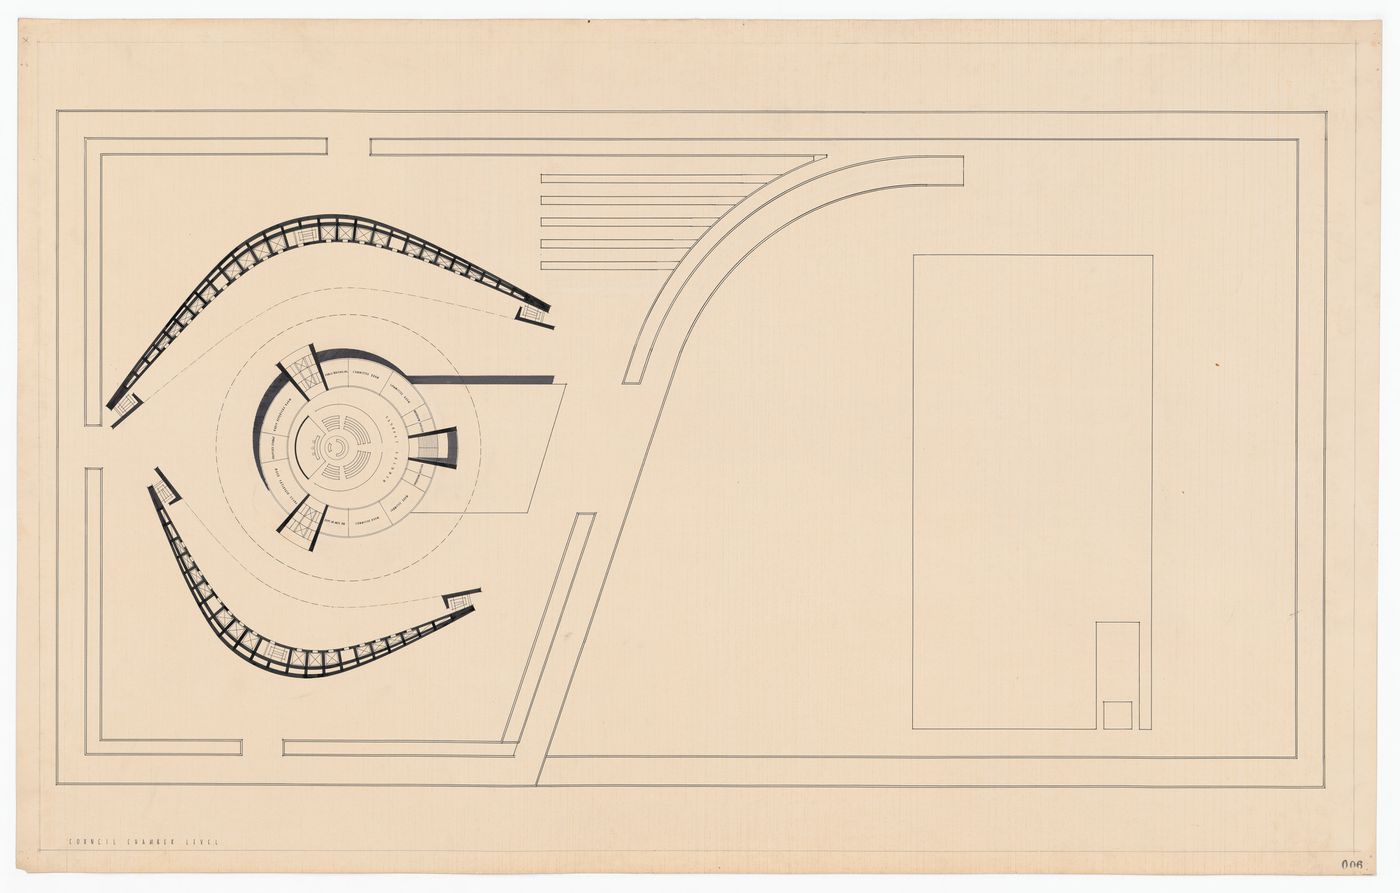 Council chamber level plan for Toronto City Hall and Civic Square, Toronto